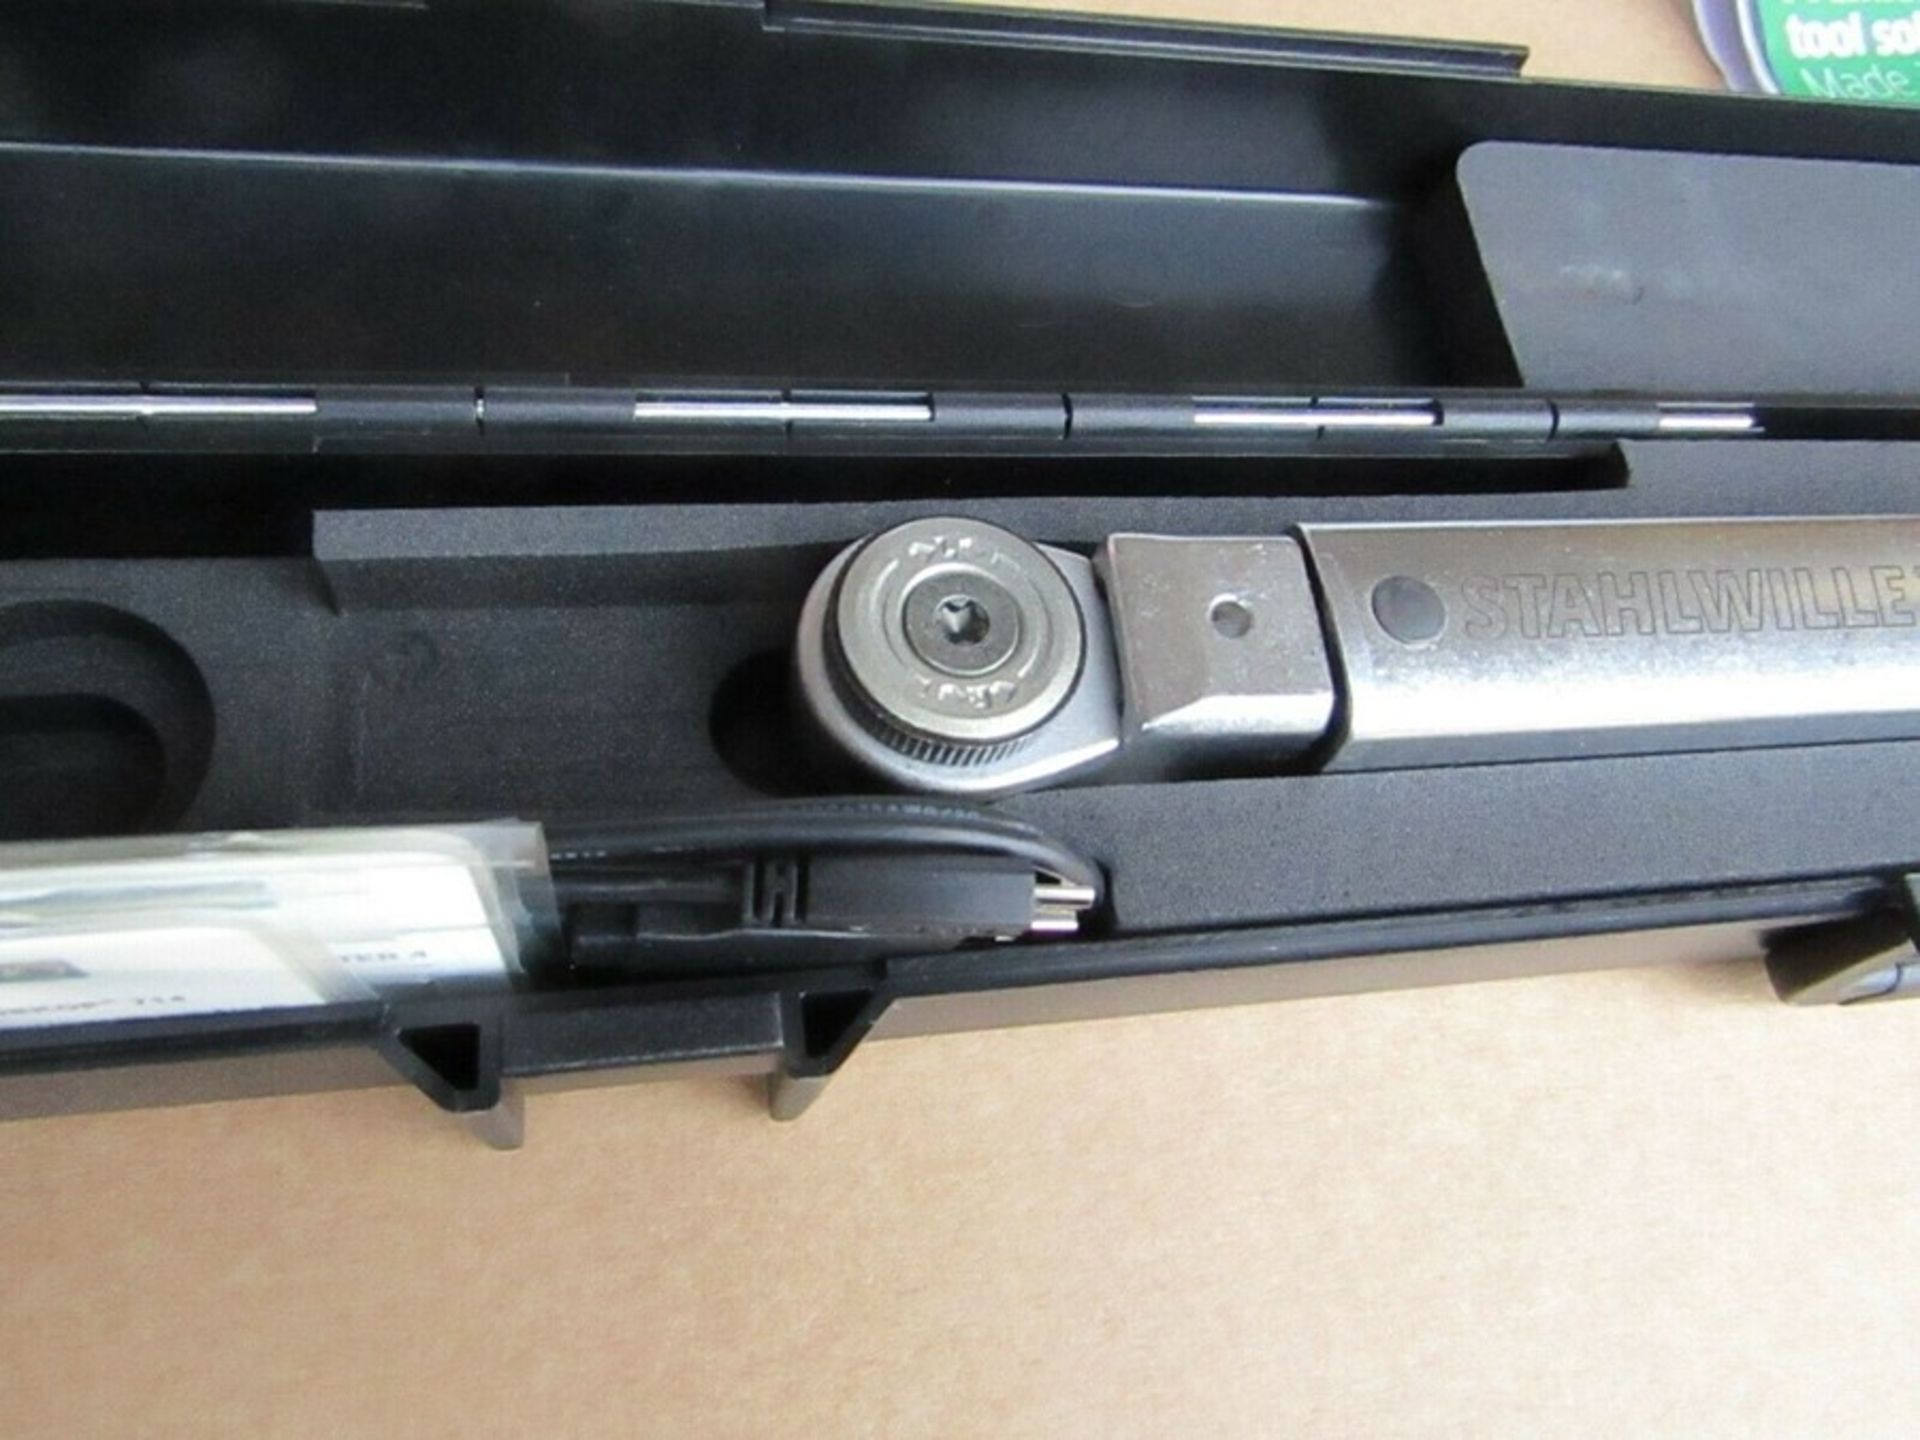 STAHLWILLE 1/2in Sq Drive Manoskop 714R Torque Wrench 10-100Nm - table 1278049 - Image 3 of 4